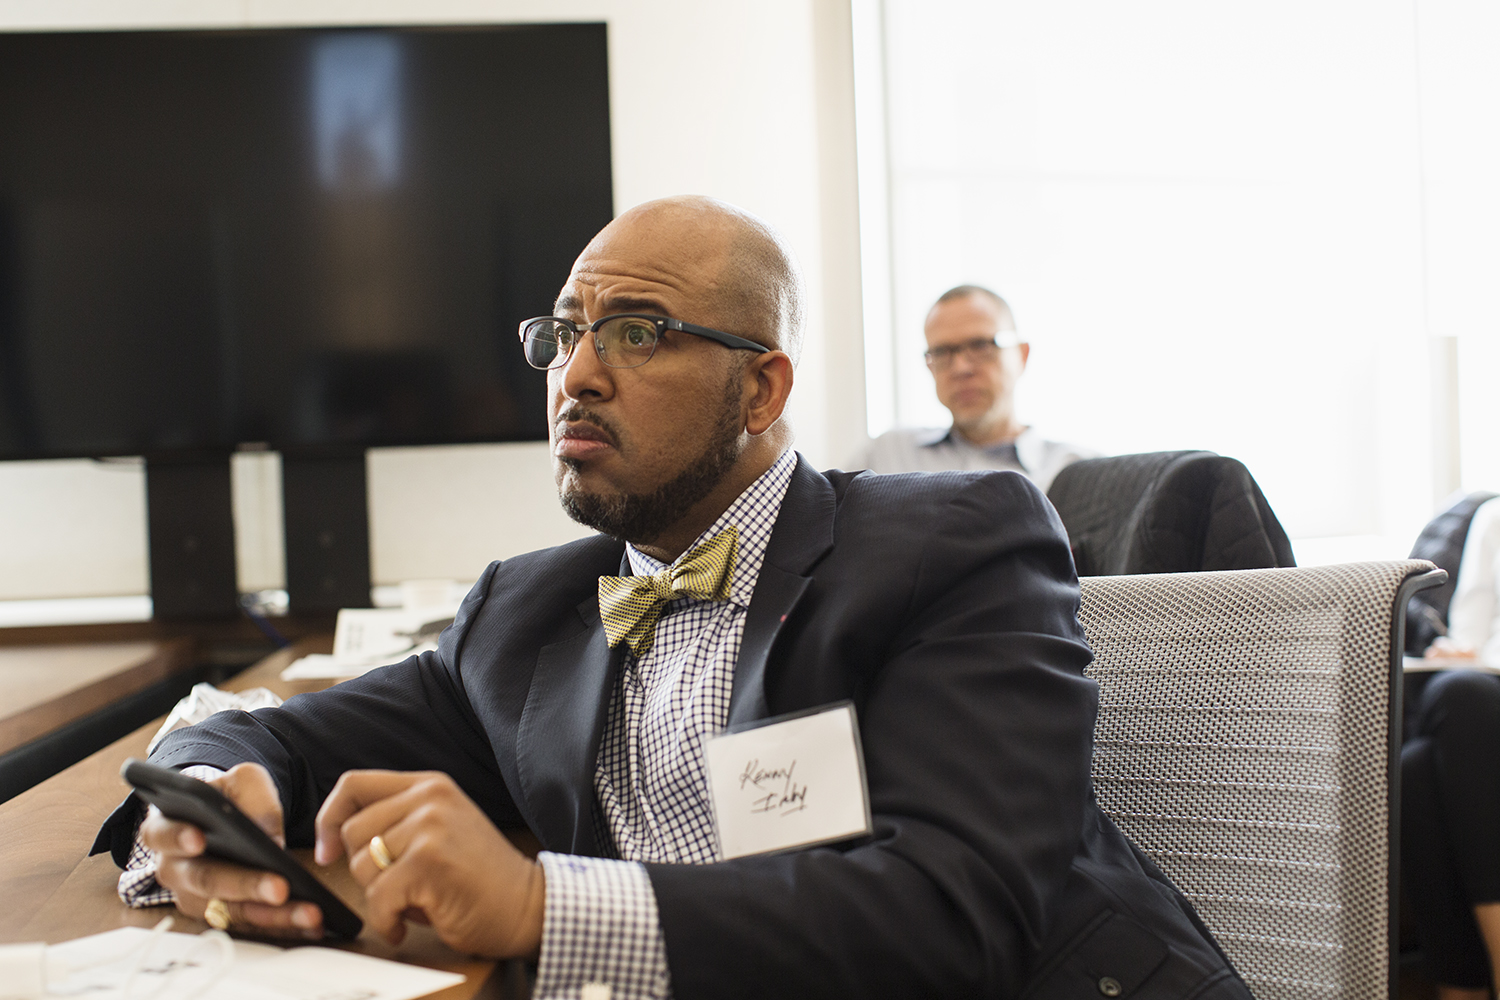  Kenny Irby (Poynter Institute) listens during panel at Image Truth/Story Truth conference, Columbia Journalism School, NY, NY, October 16, 2015 